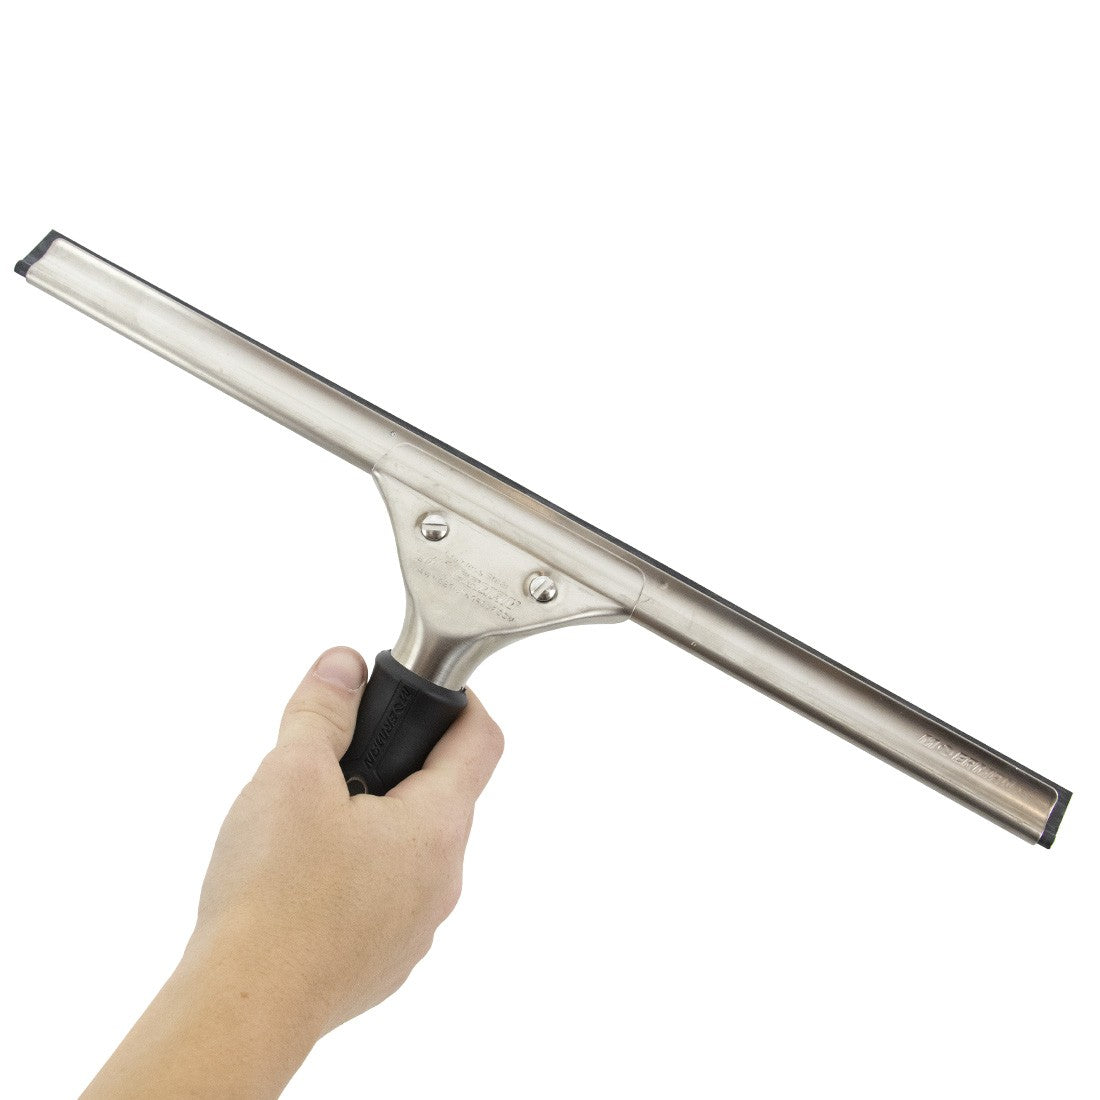 RW Clean Stainless Steel Floor Squeegee - 21 1/2'' x 5'' x 1 1/2'' - 1  count box